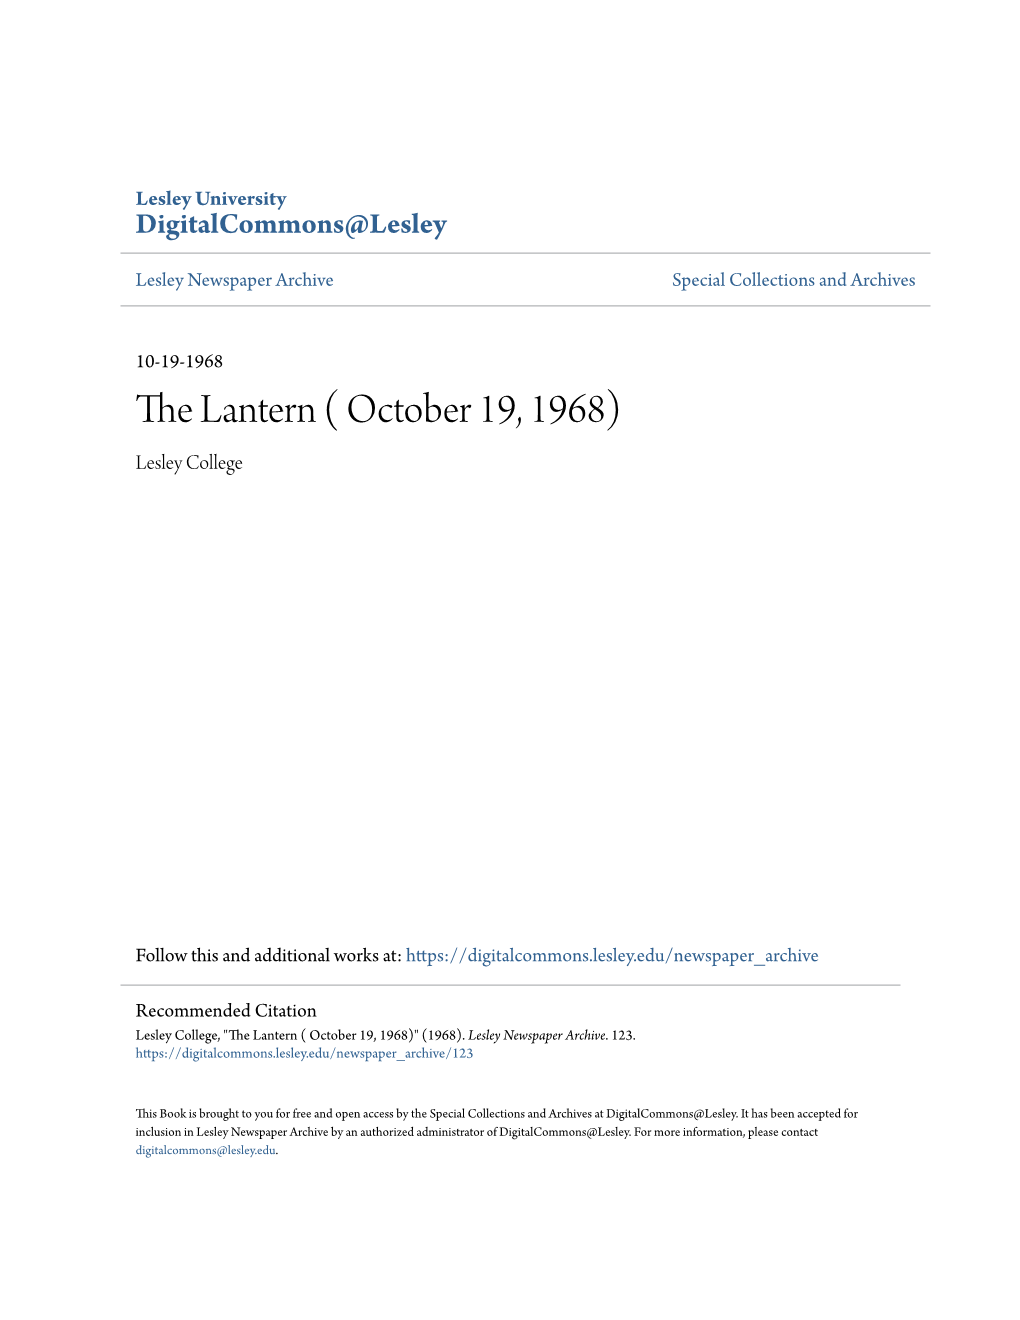 The Lantern ( October 19, 1968) Lesley College